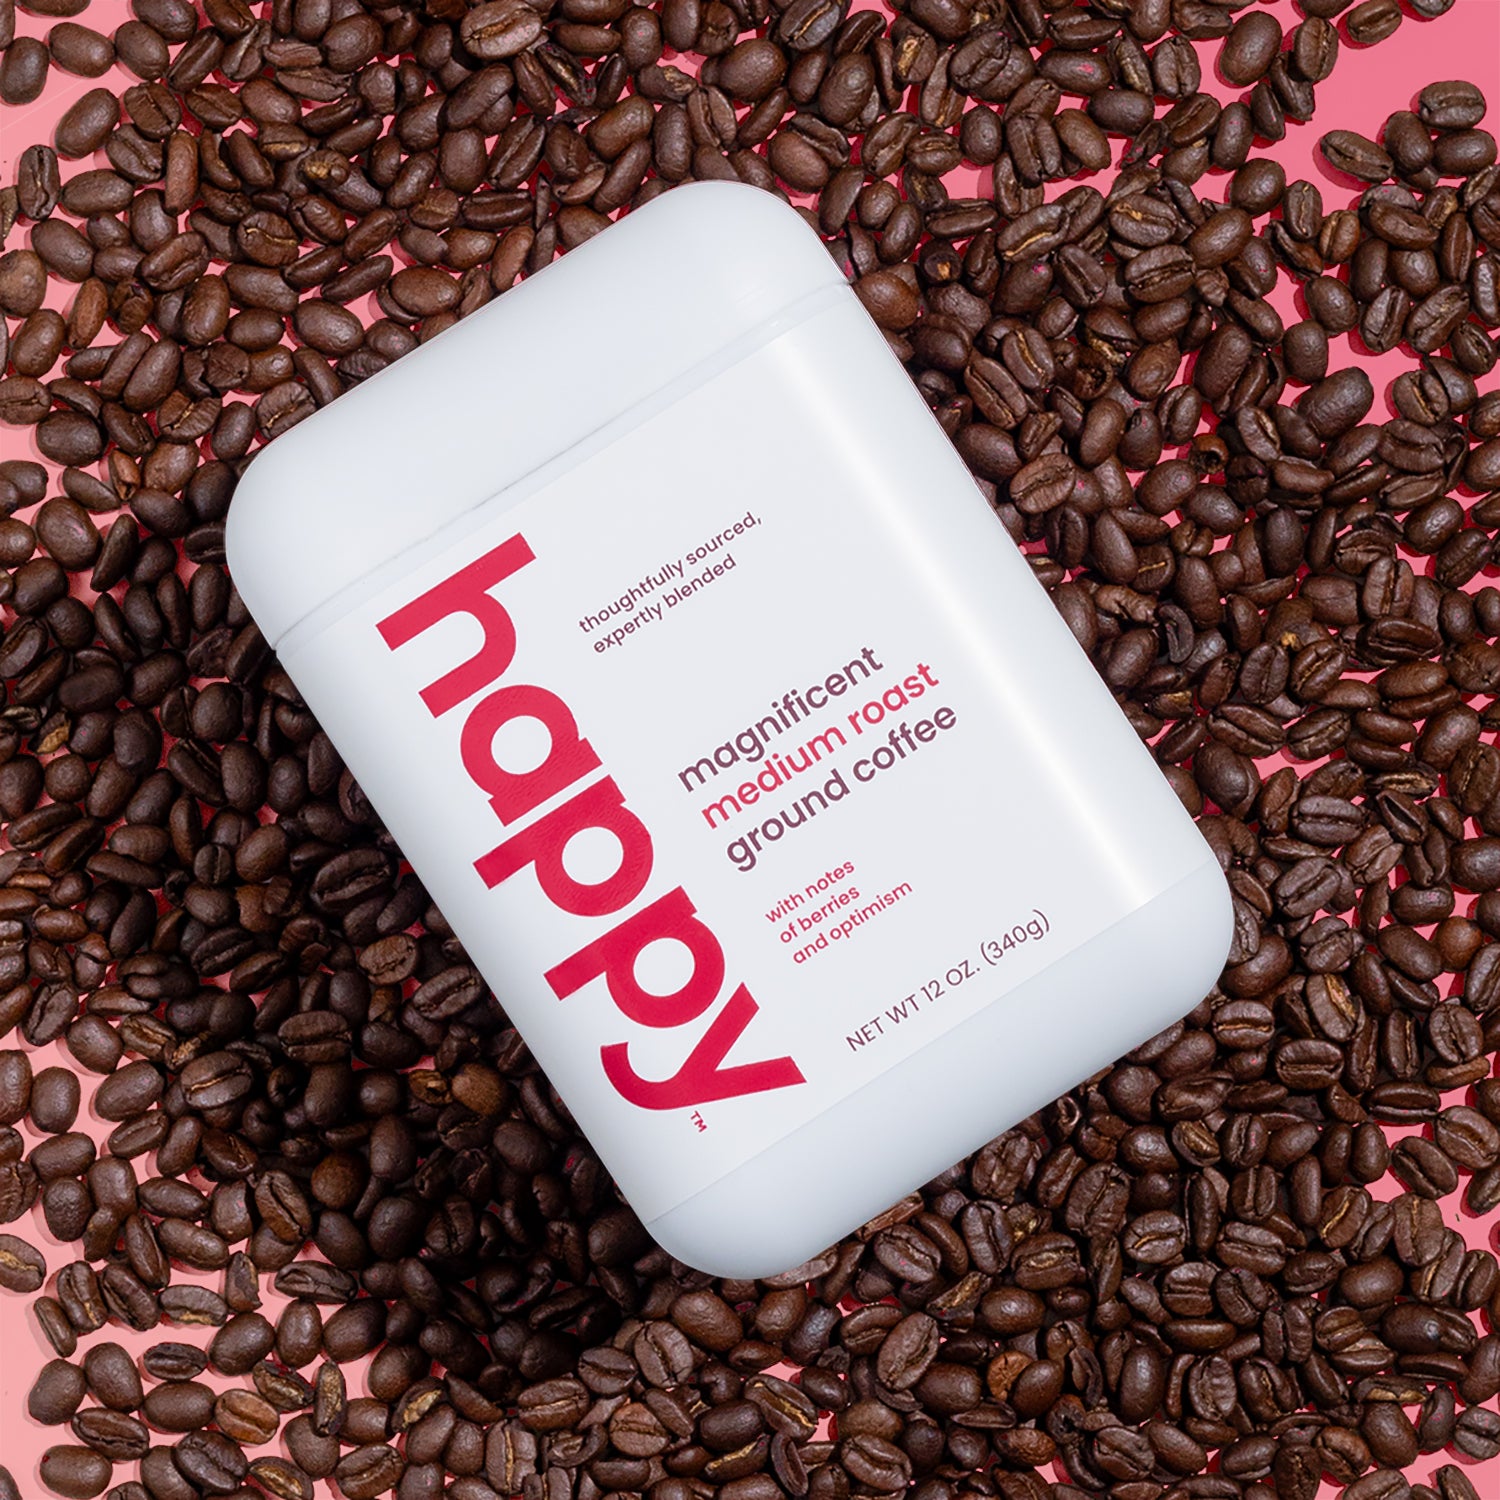 A container of Magnificent Medium roast ground coffee resting on a bed of coffee beans